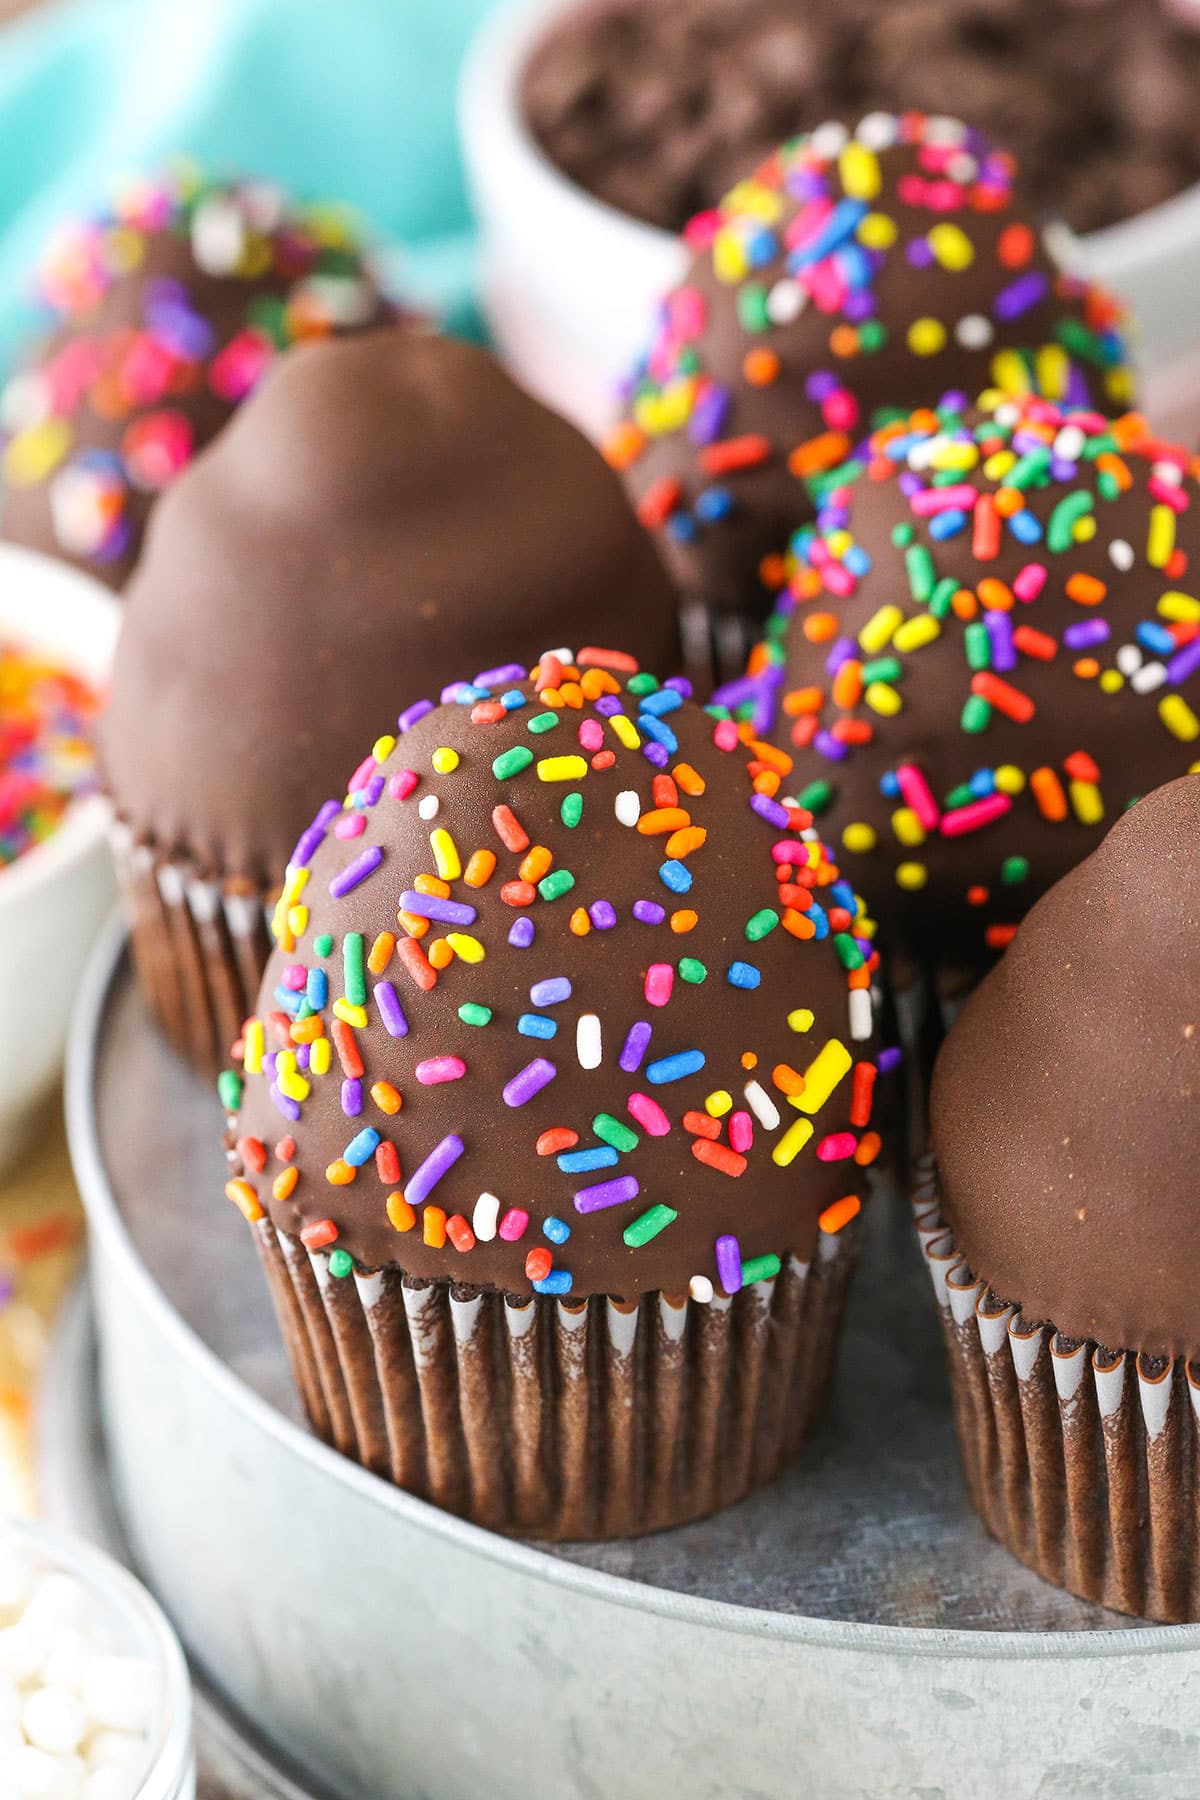 Ultimate Ice Cream Chocolate Cupcakes with and without multicolored sprinkles in a gray pan